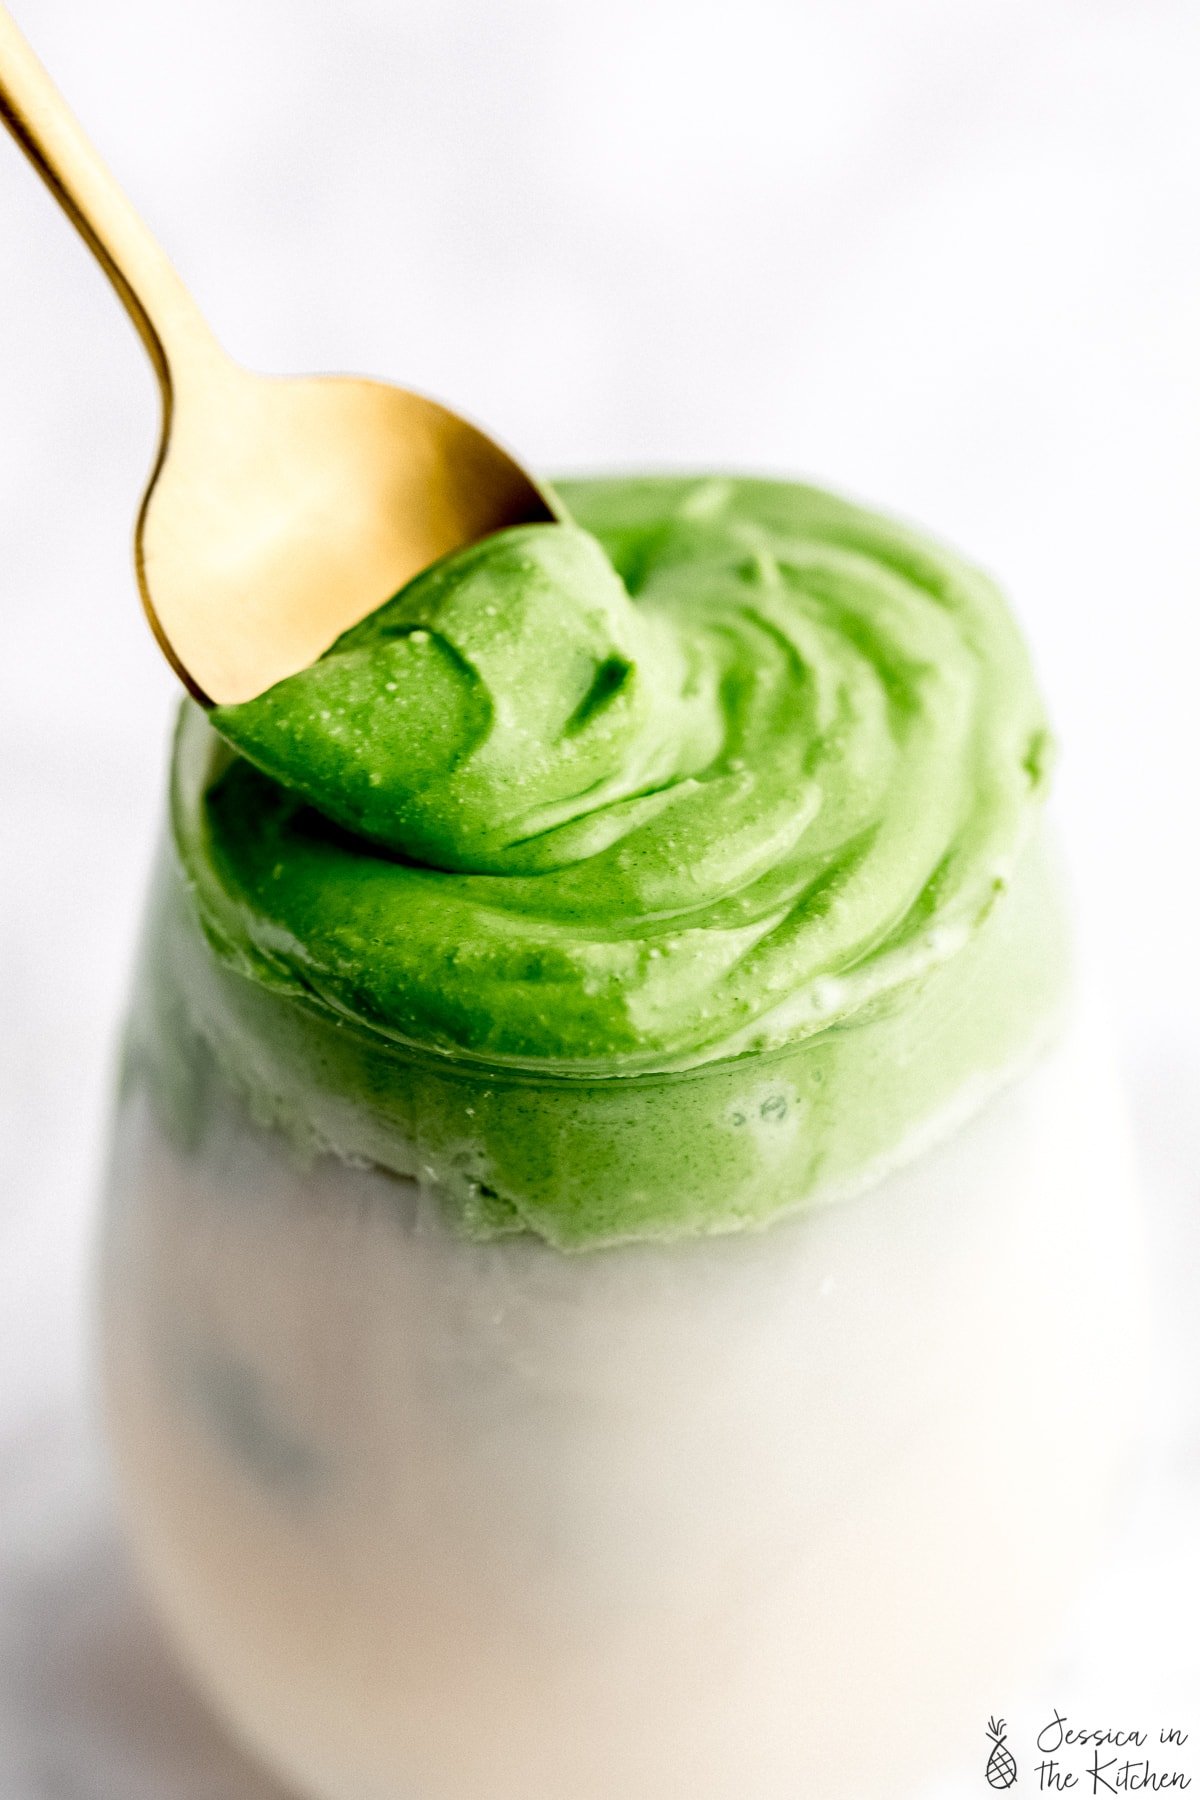 A close up shot of whipped matcha in a glass with milk with a gold spoon slightly pulling the whipped matcha froth.